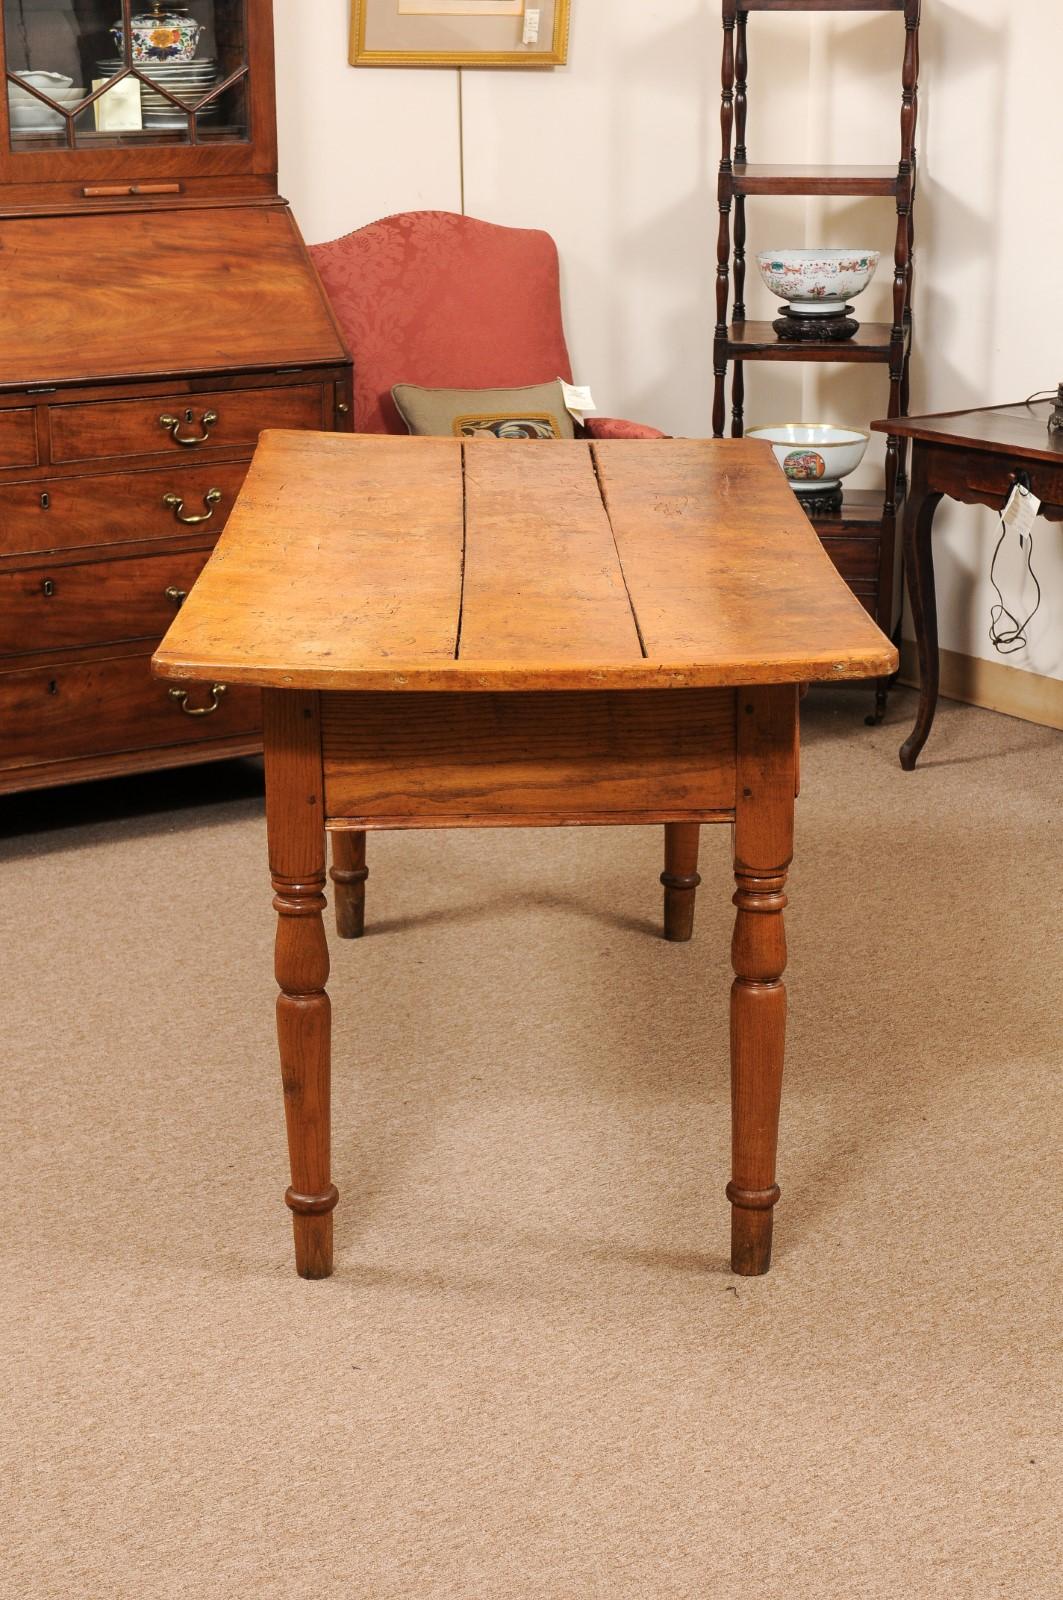 Large American Pine Kitchen Table with 2 Deep Drawers and Turned Legs, c1890 For Sale 3